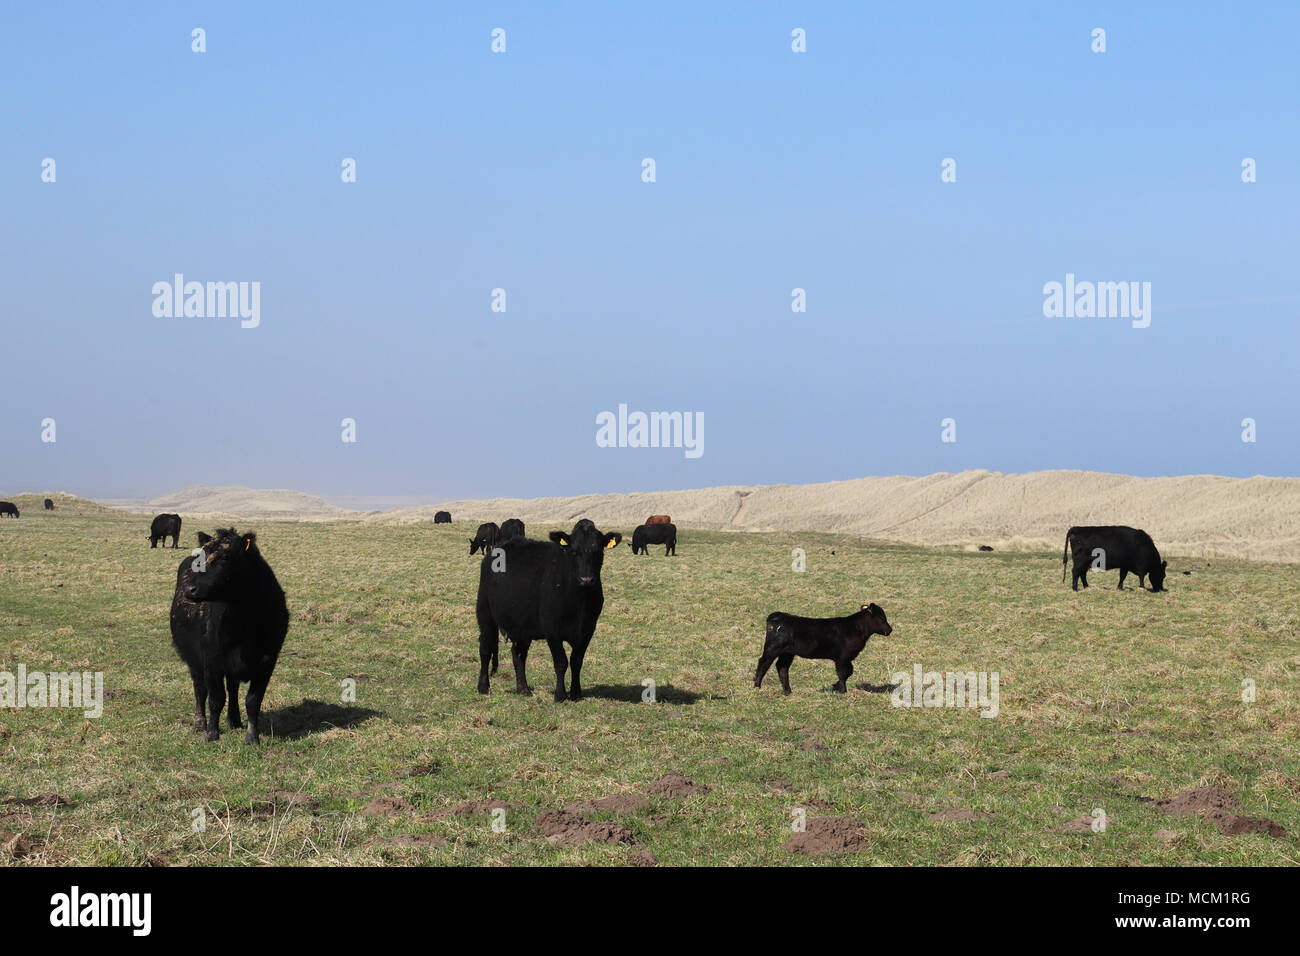 Black dairy cows grazing in field near sand dunes, with space for copy Stock Photo